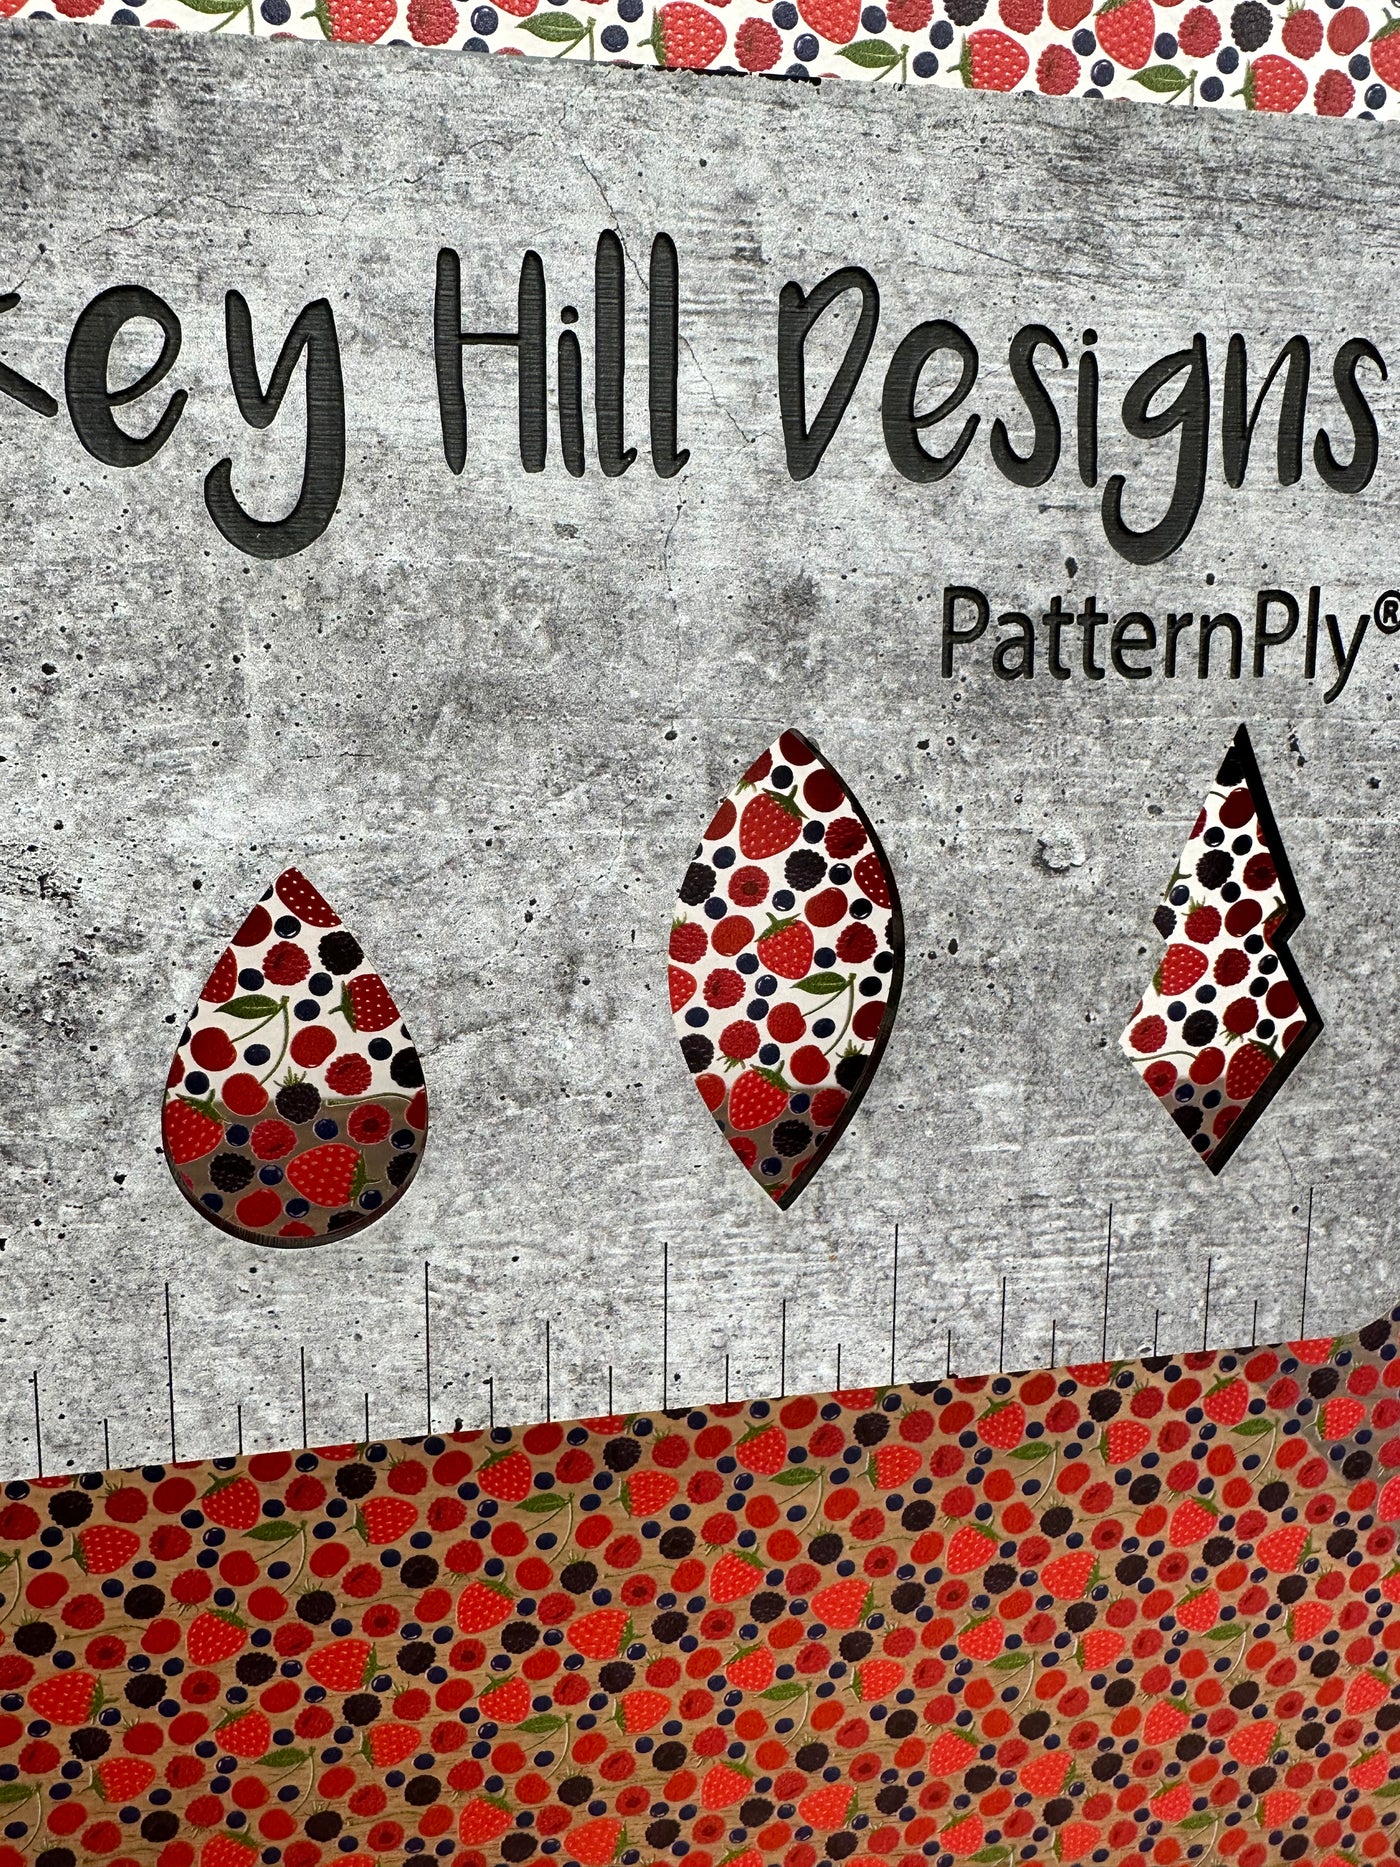 PatternPly® Scattered Mixed Berries